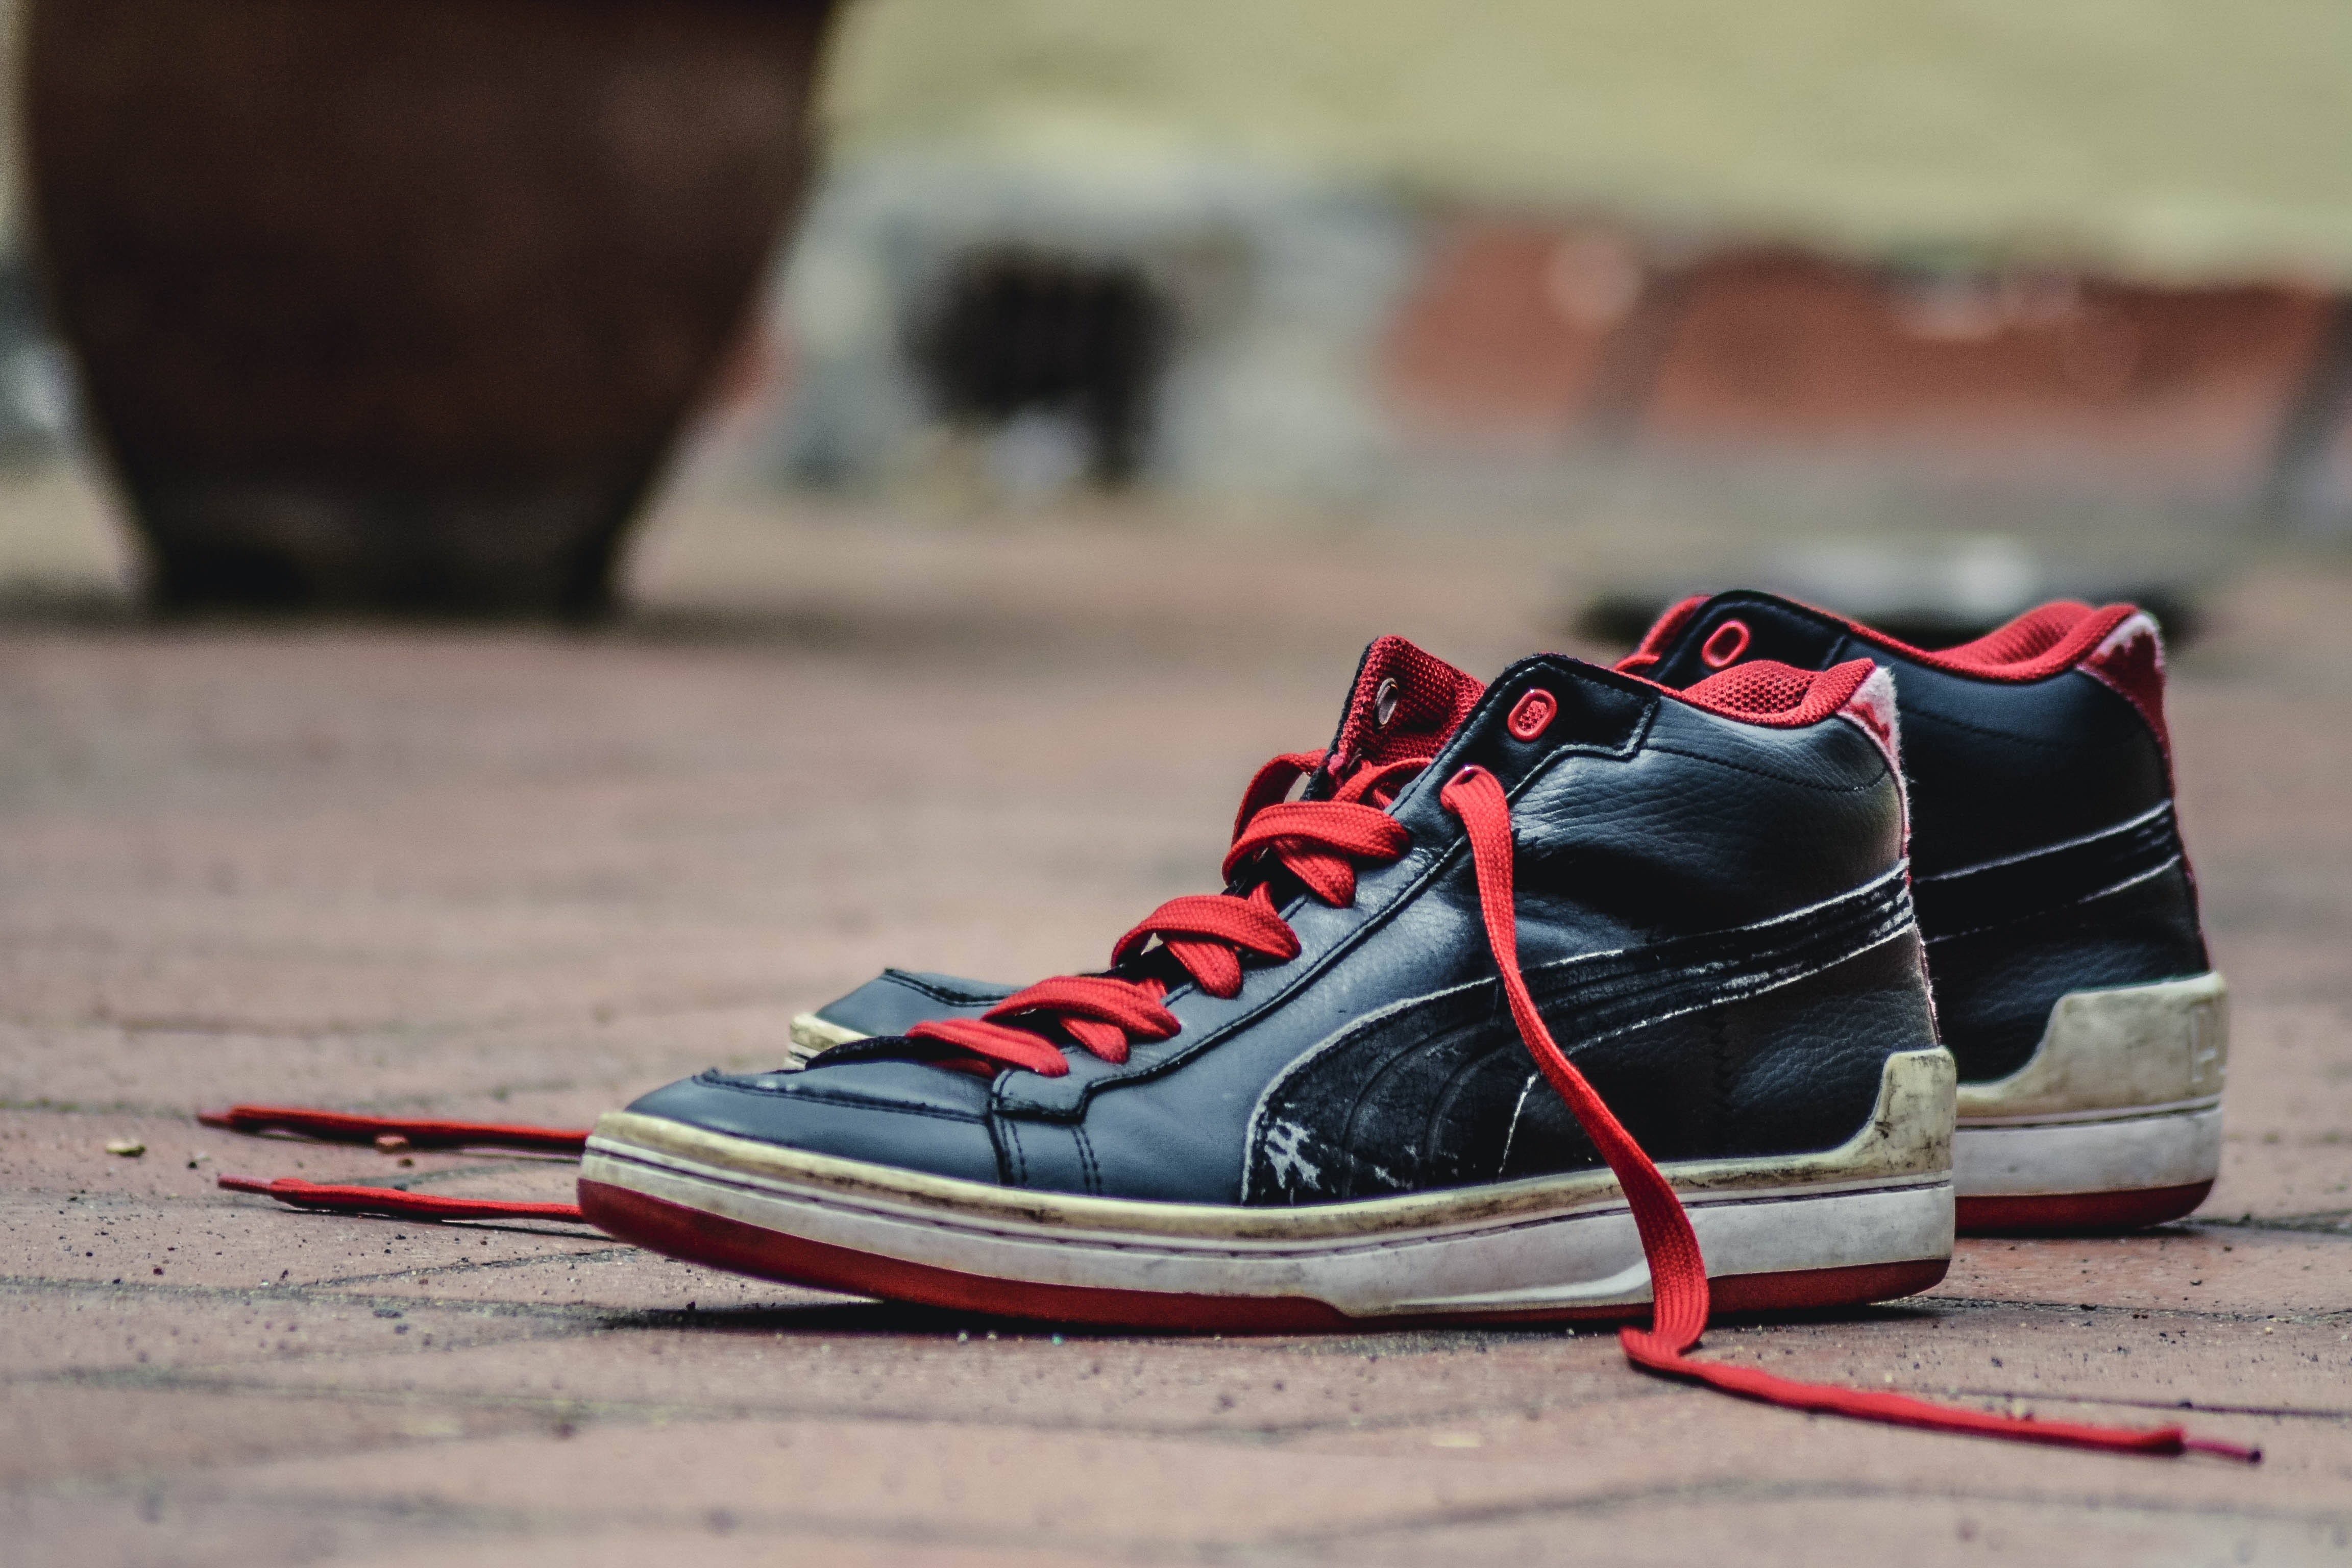 I started noticing shoes everywhere | Photo: Pexels